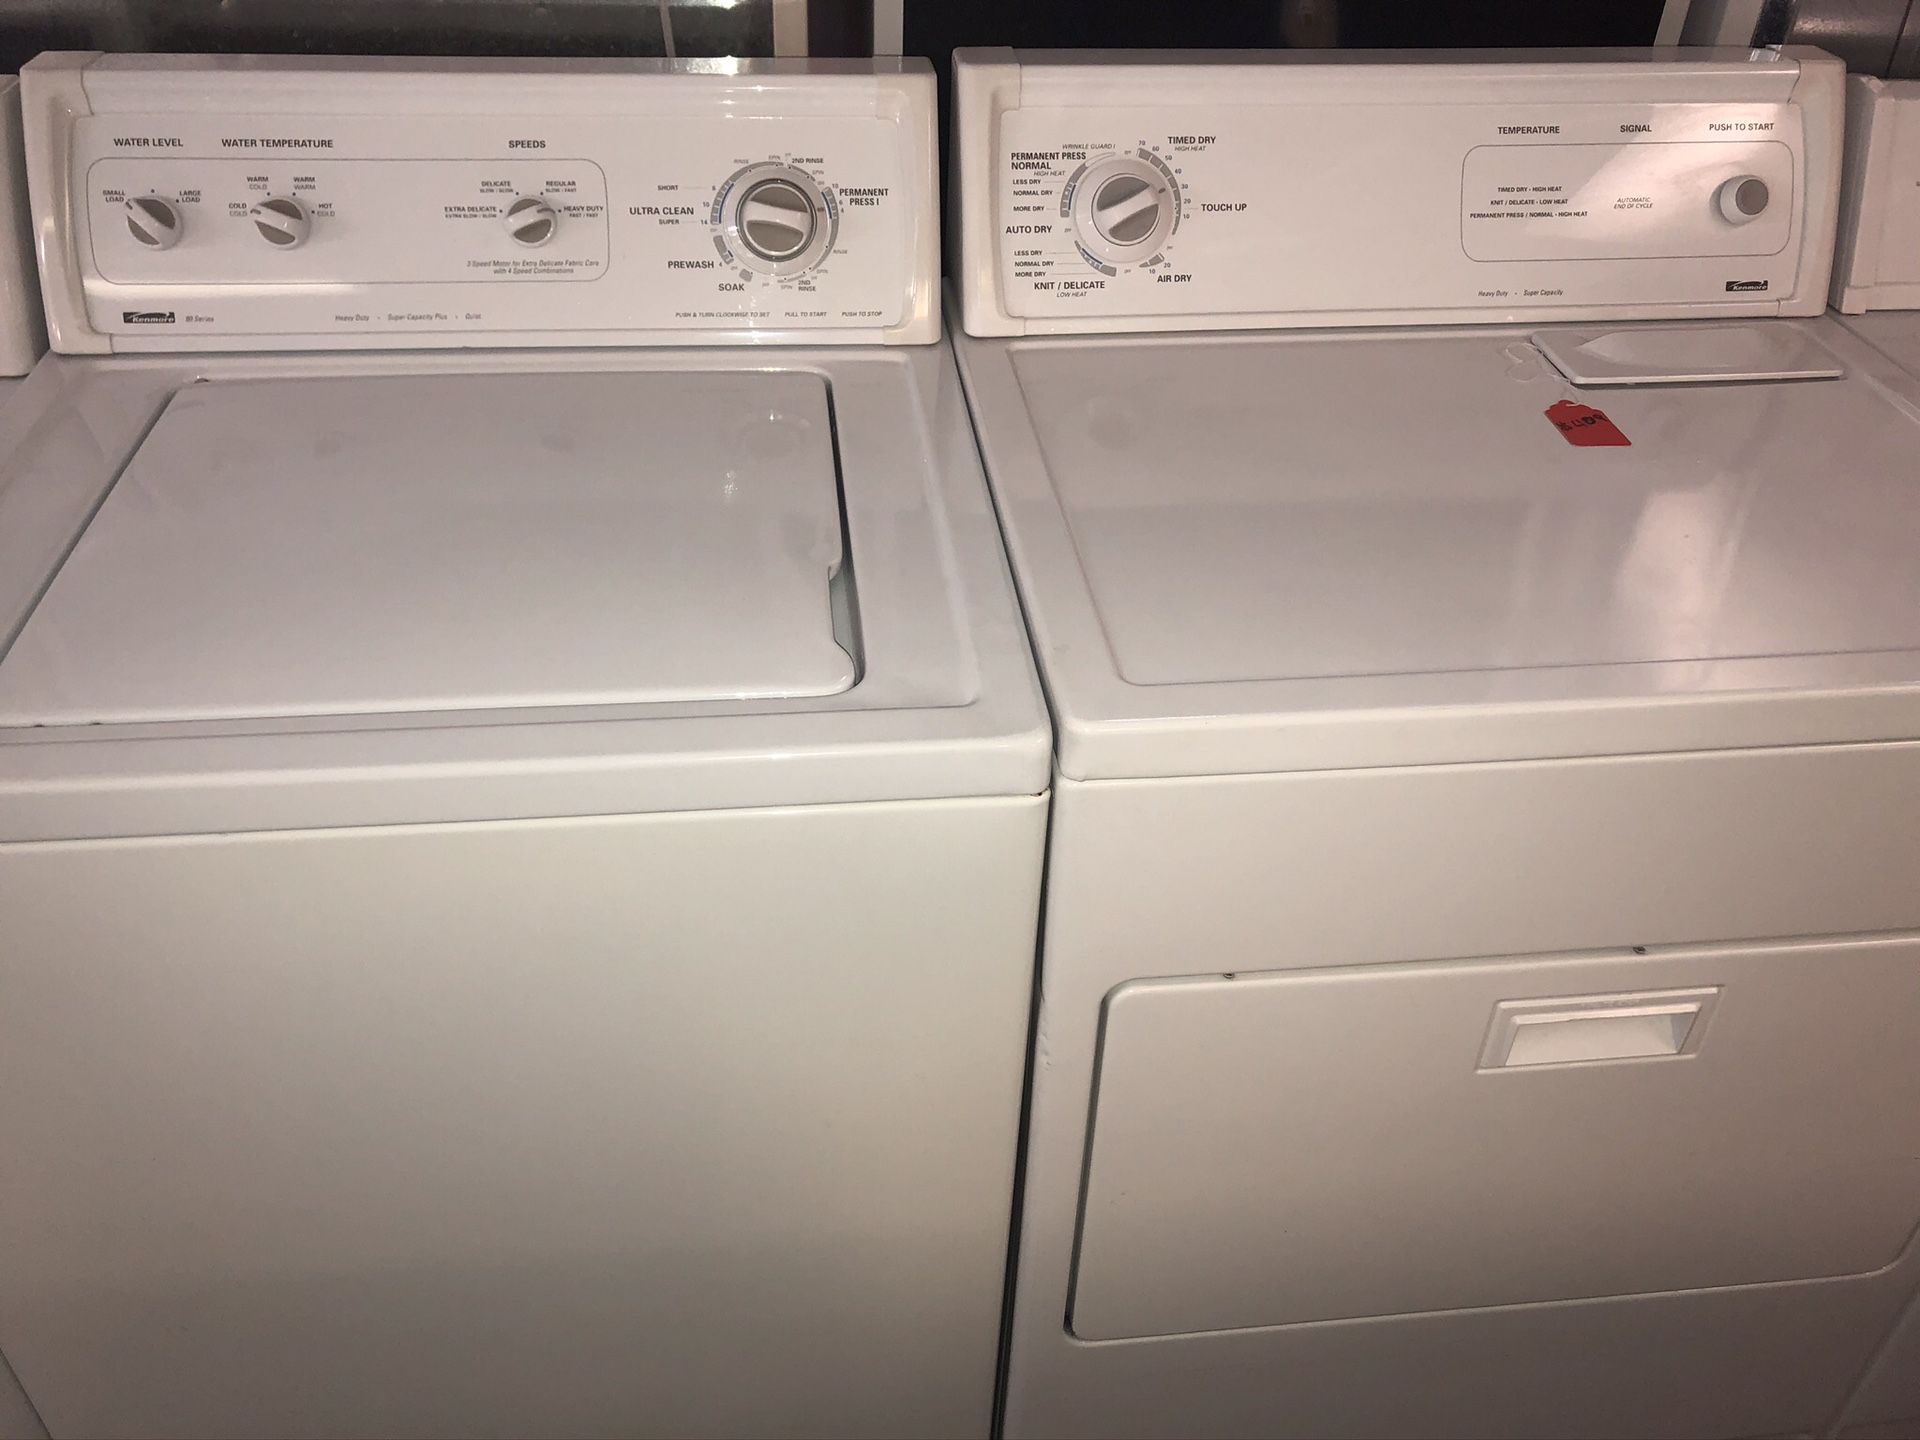 Used kenmore heavy duty washer and dryer set. 1 year warranty